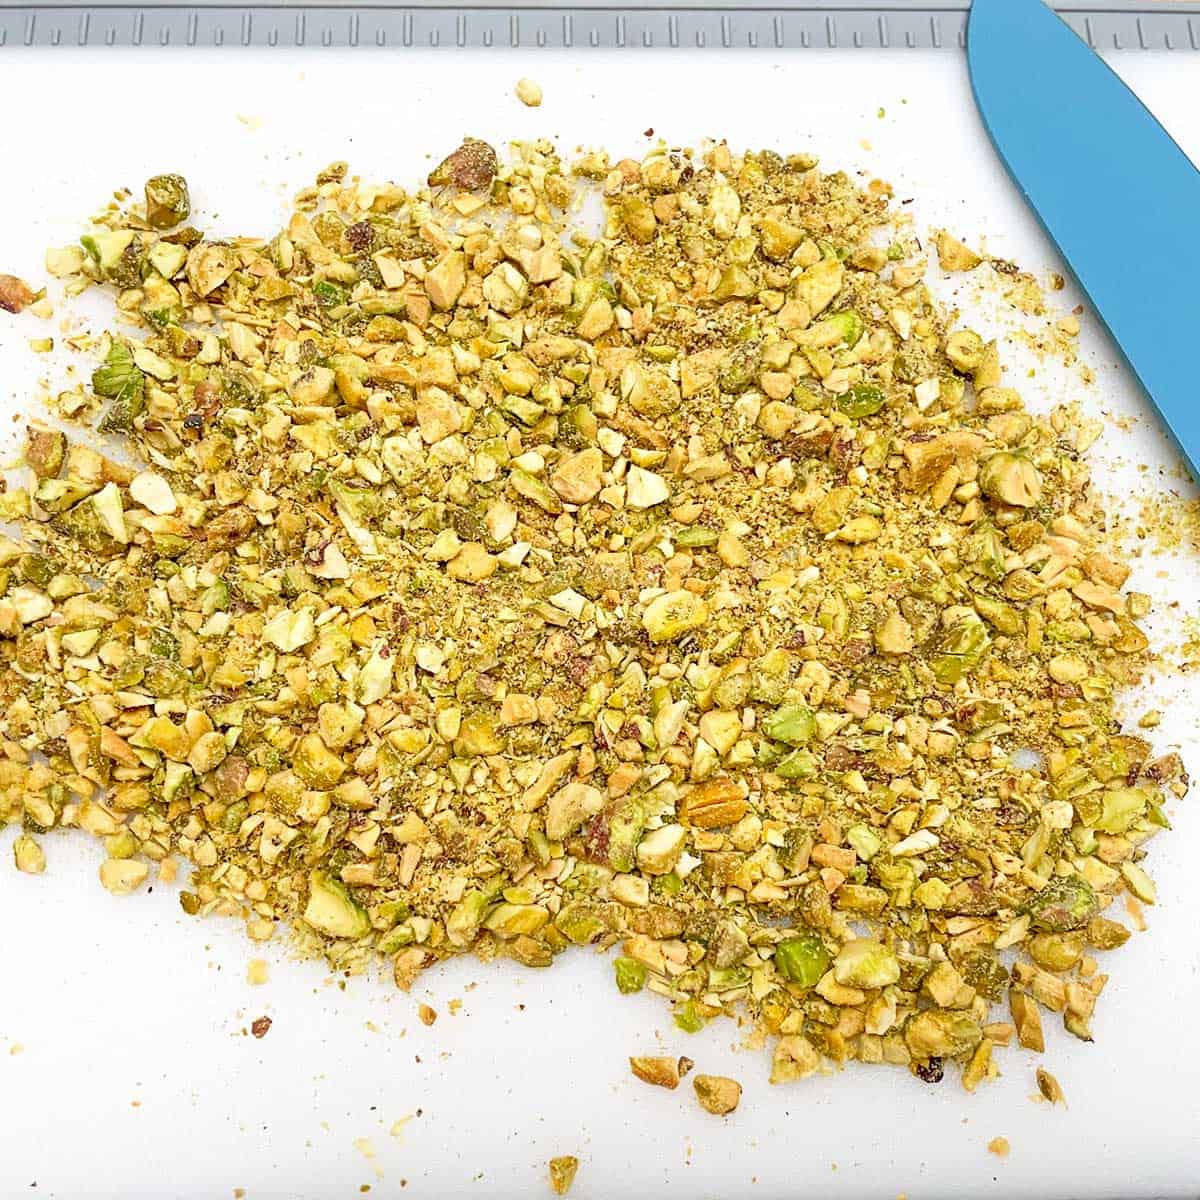 Chopping pistachios into very small pieces for topping.